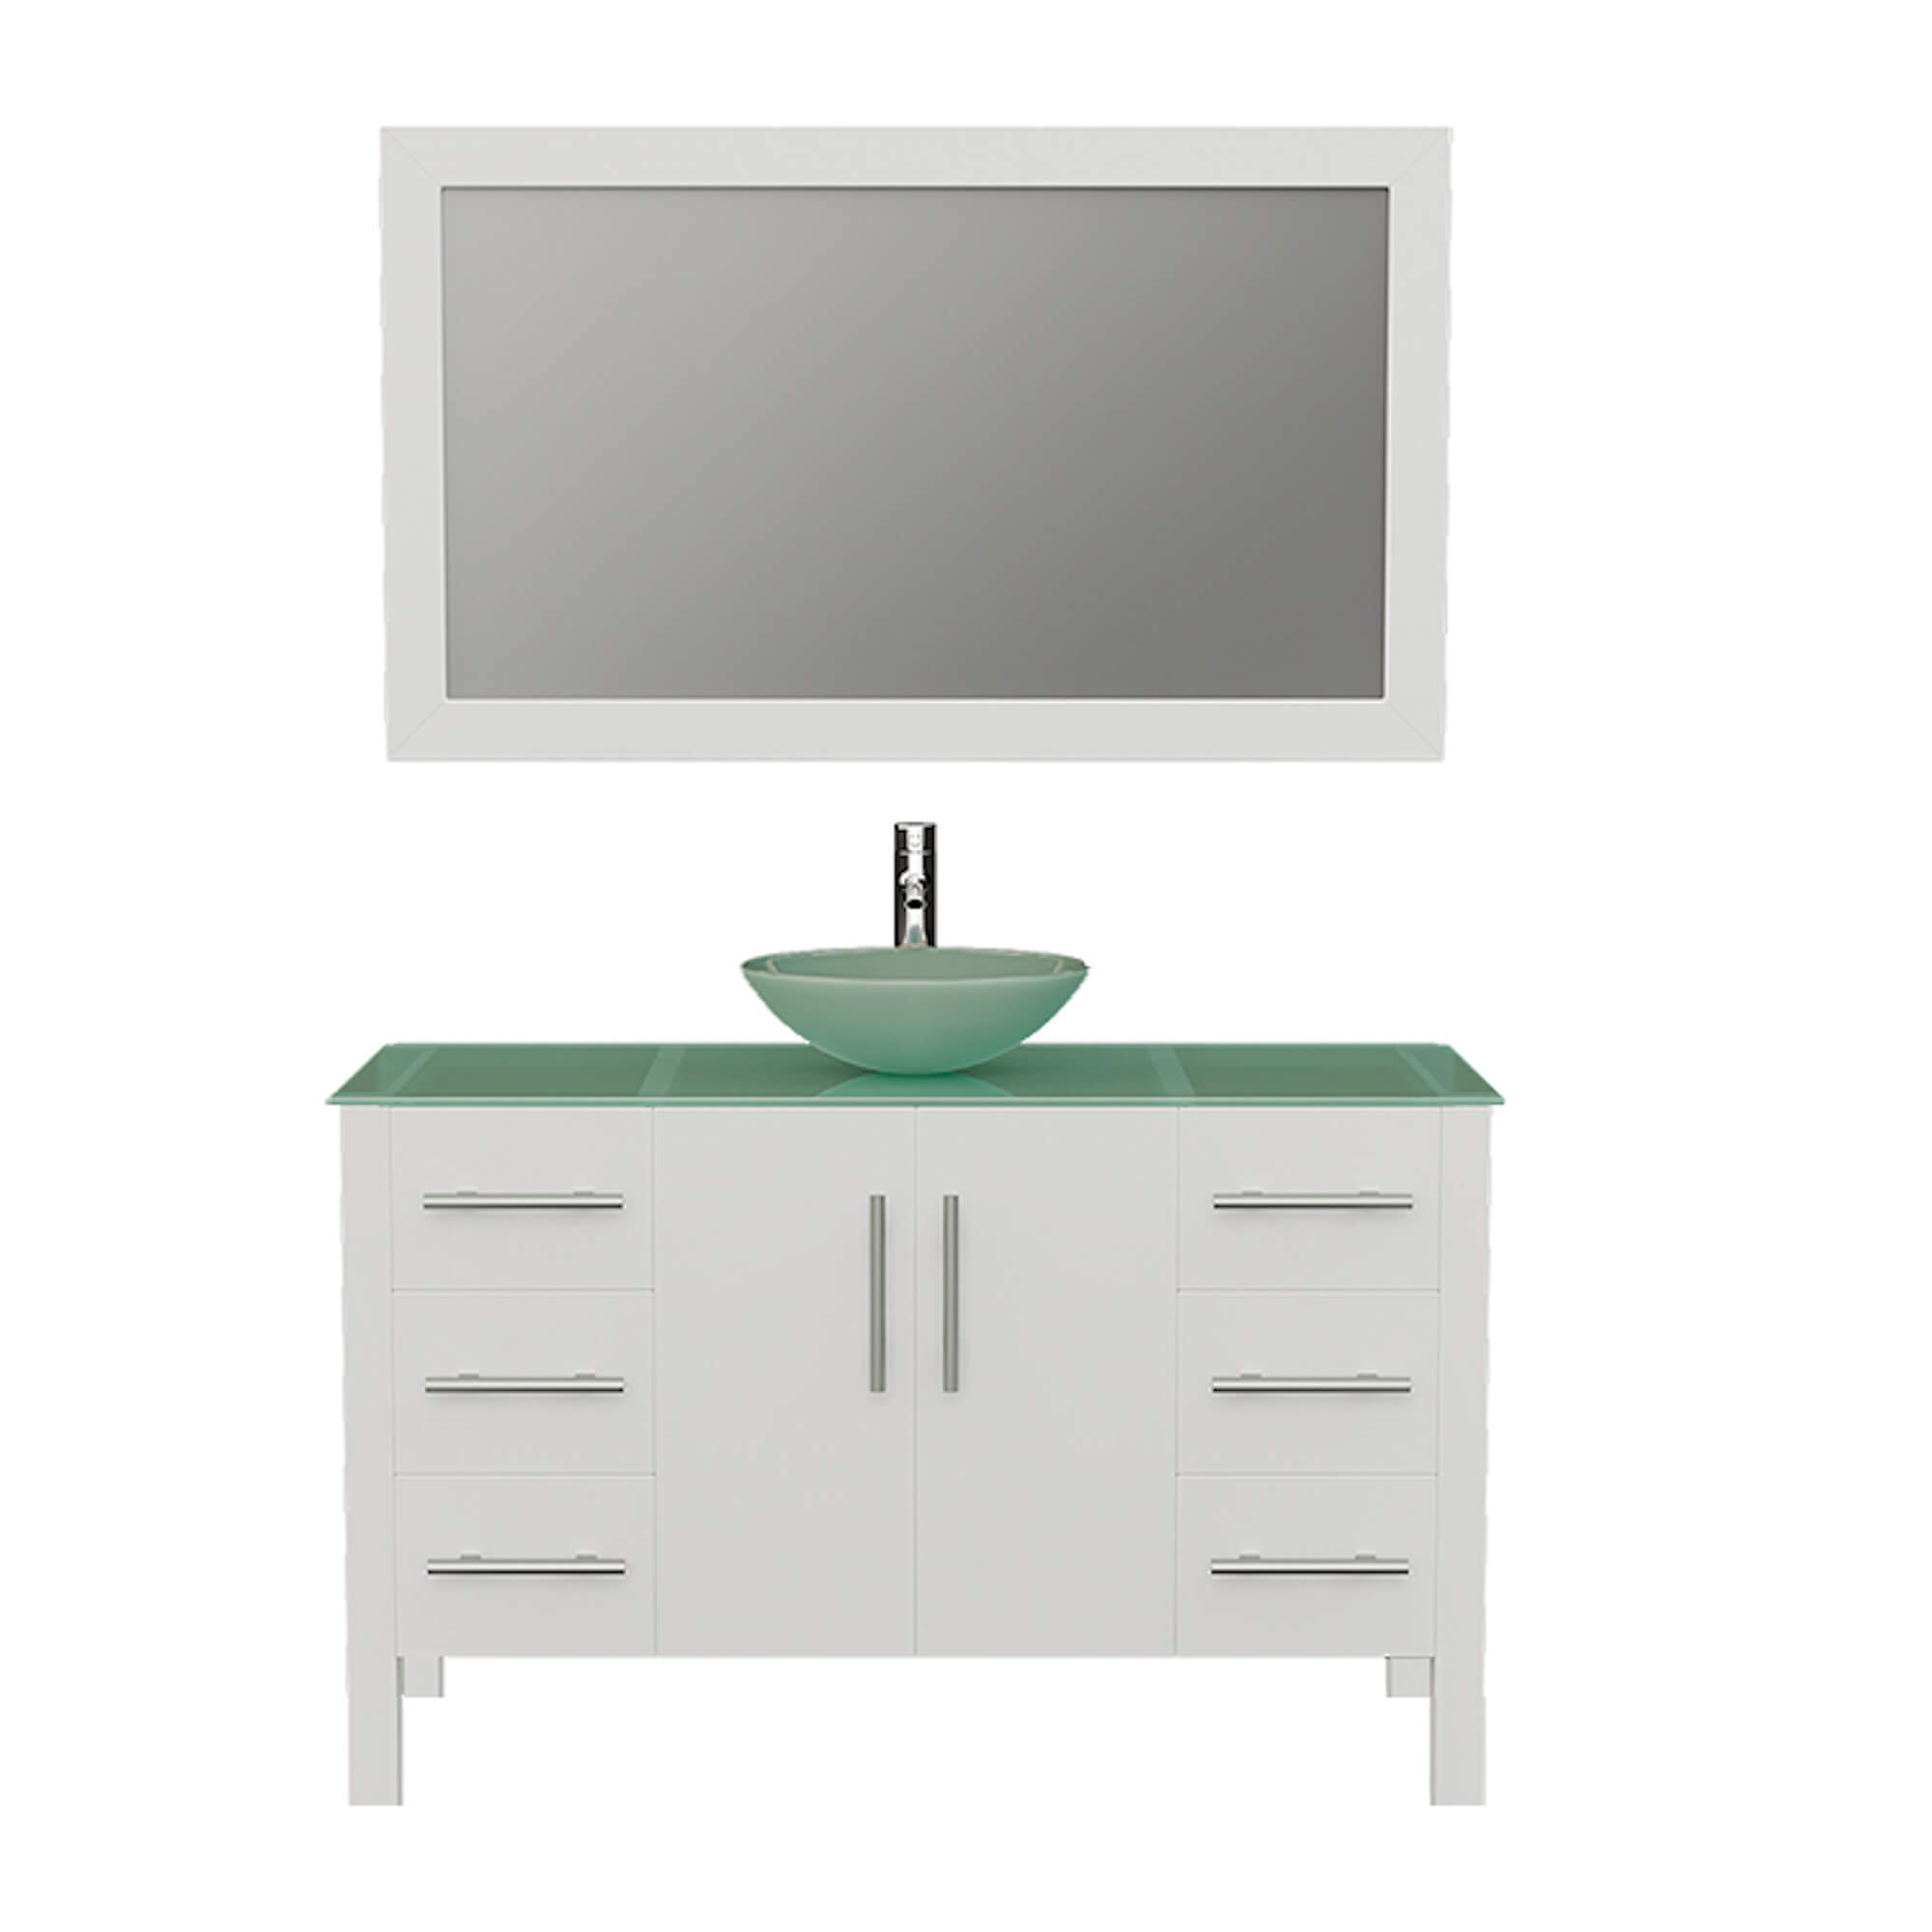 Cambridge Plumbing 8116B-W 48" Single Bathroom Vanity in White with Tempered Glass Top and Vessel Sink, Matching Mirror, Front View with Chrome Faucet